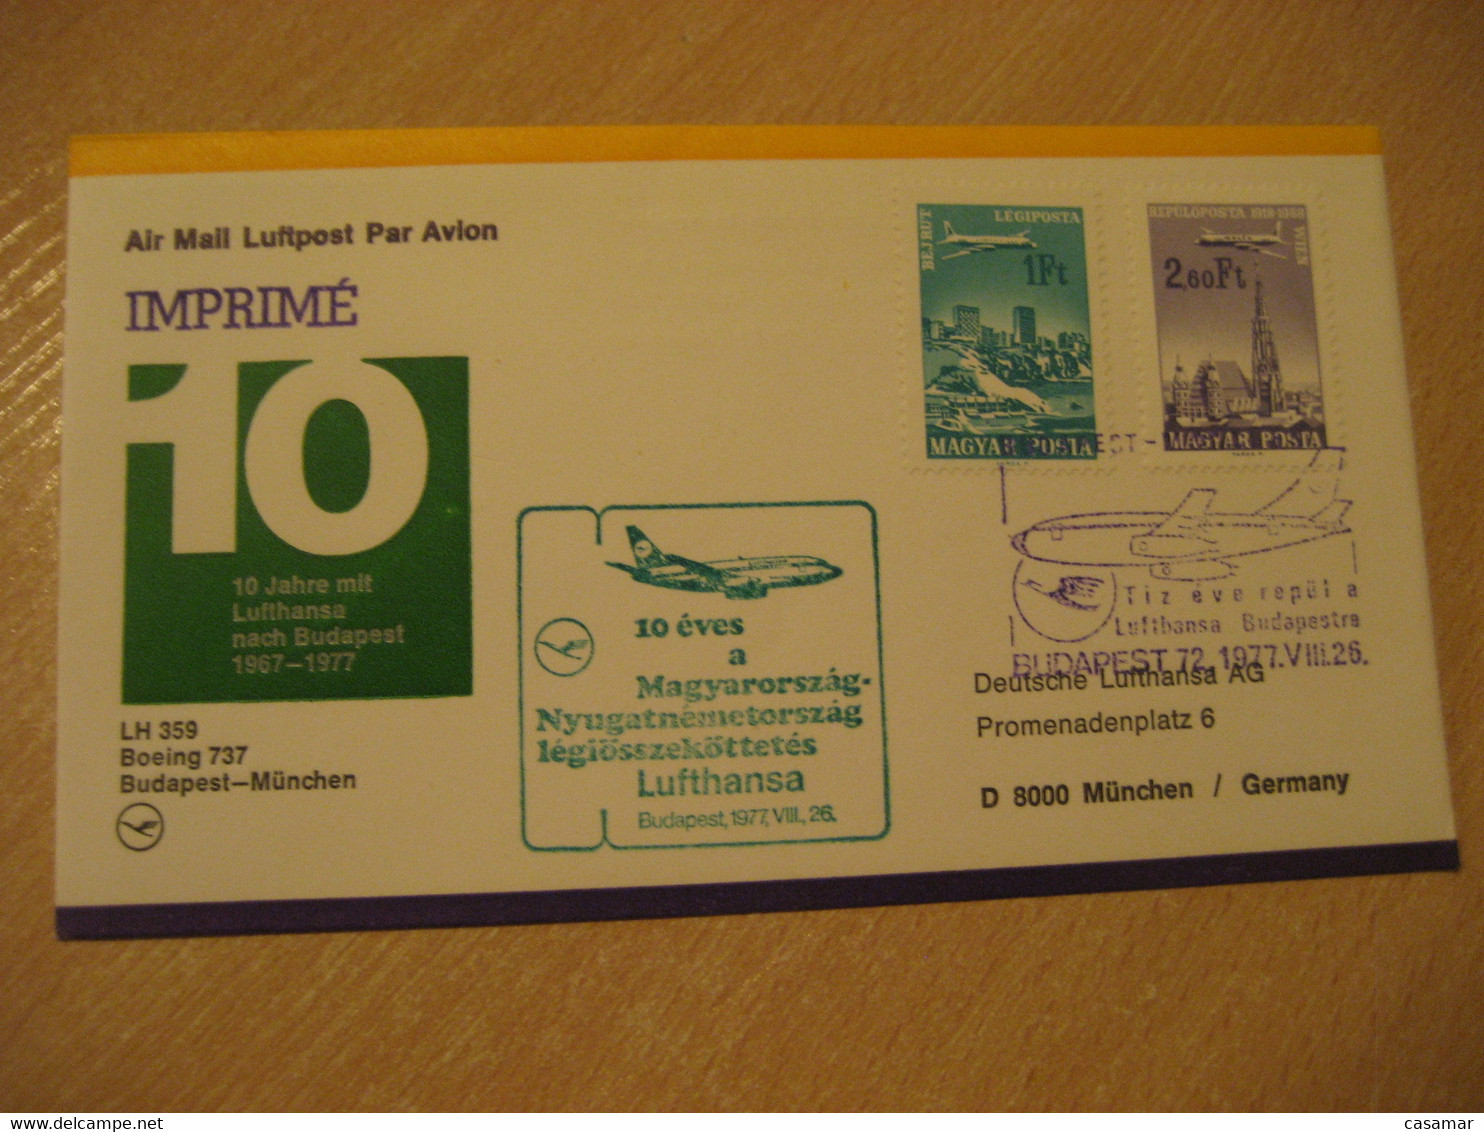 BUDAPEST Munchen 1977 Lufthansa Airlines Airline Boeing 737 First Flight Green Cancel Cover HUNGARY GERMANY - Storia Postale